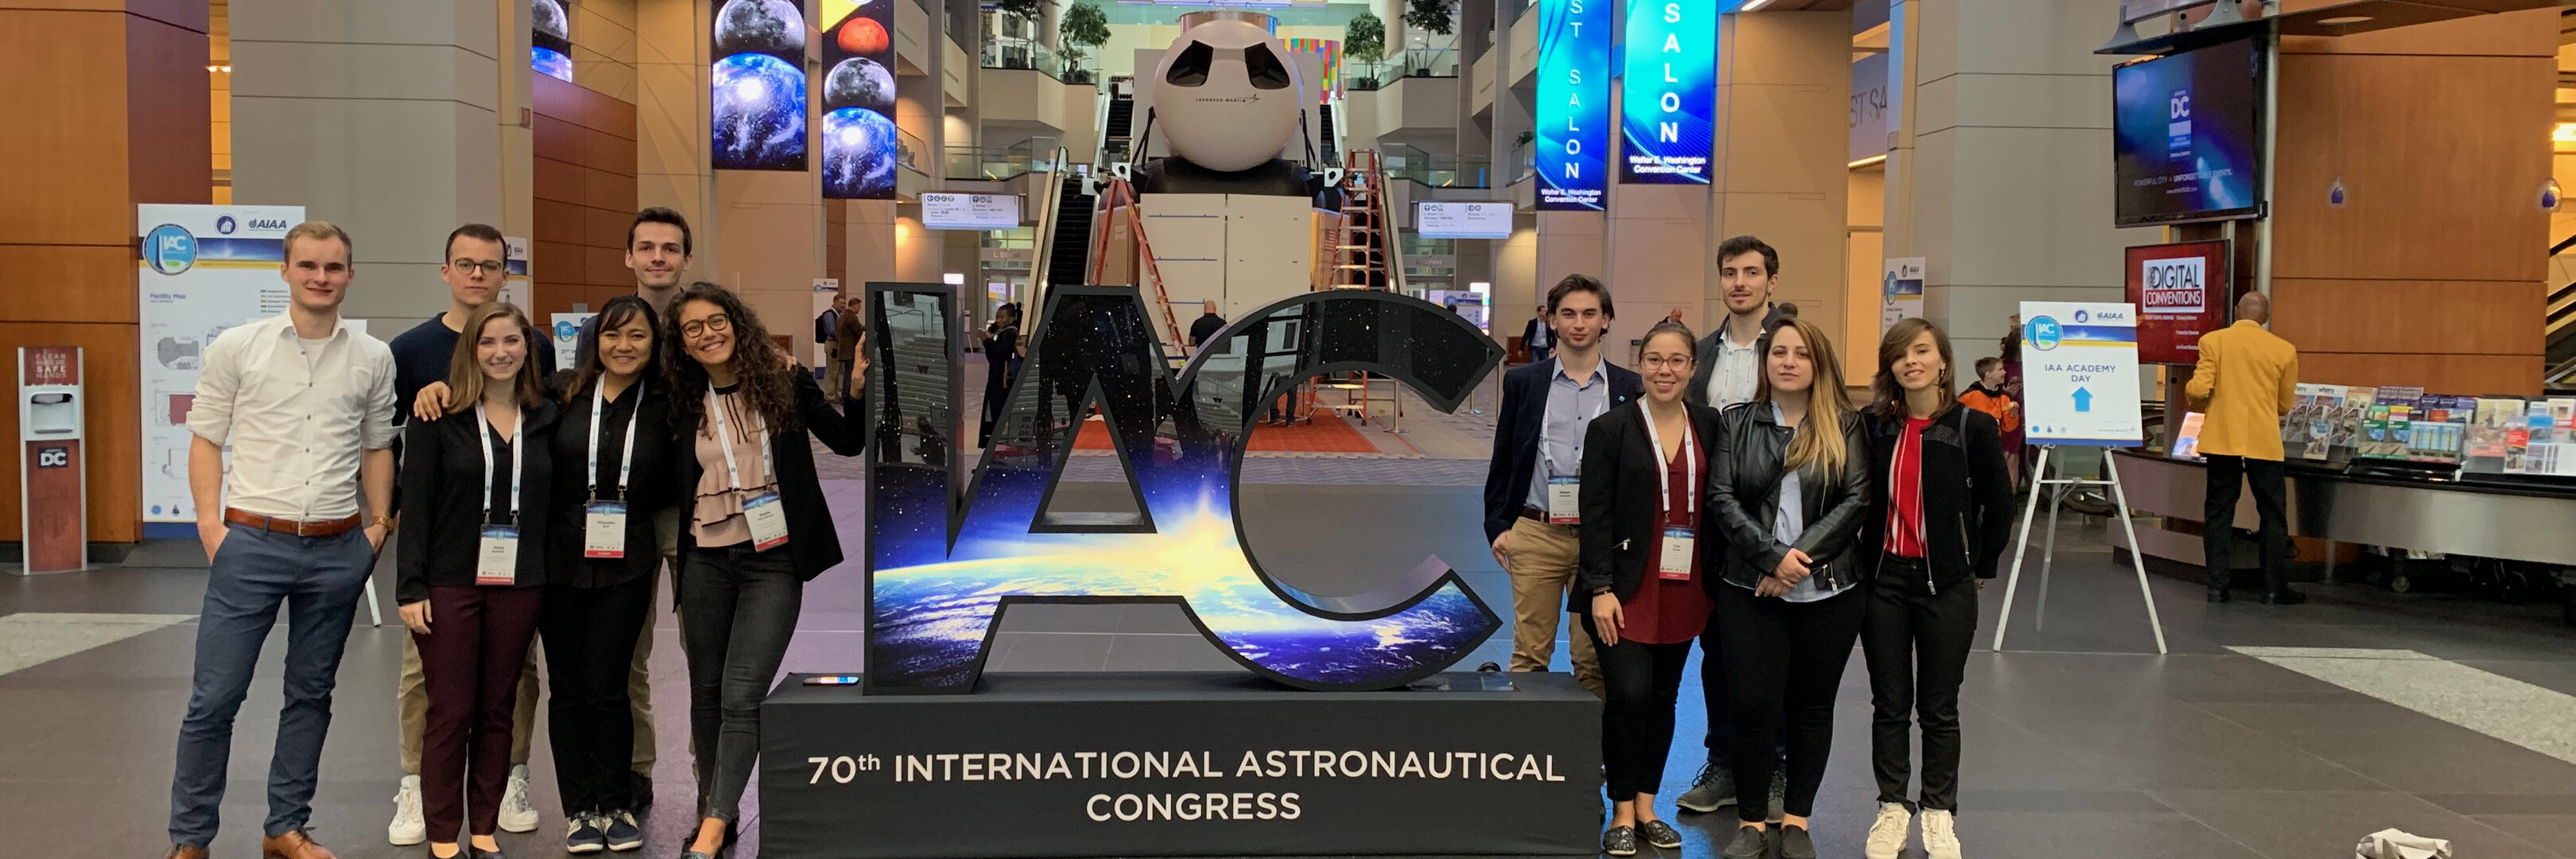 ESA-sponsored students and staff at the IAC